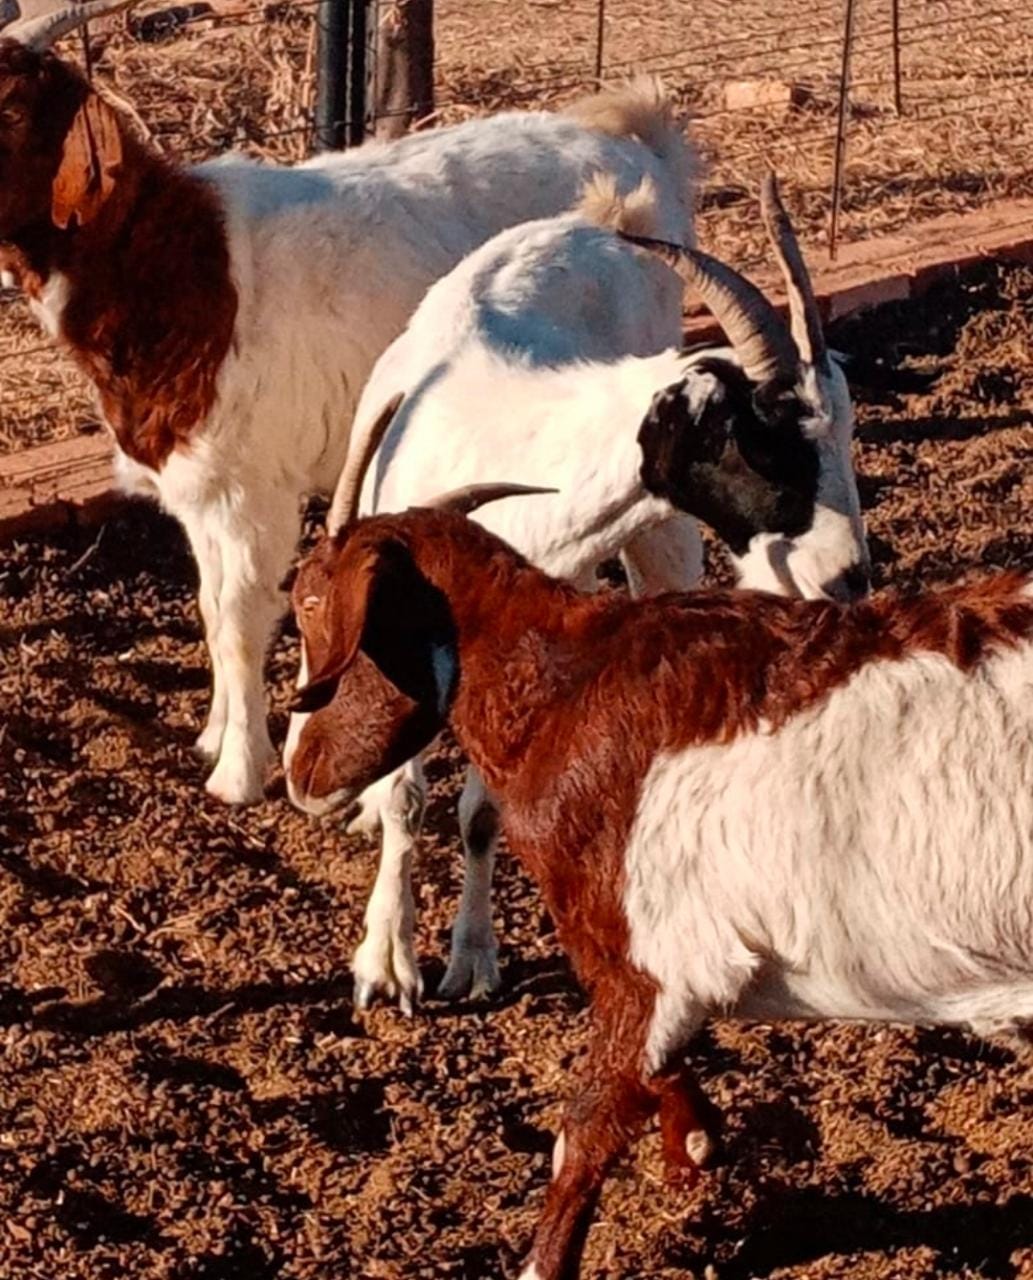 Assist police to locate possible owner/s of recovered goats